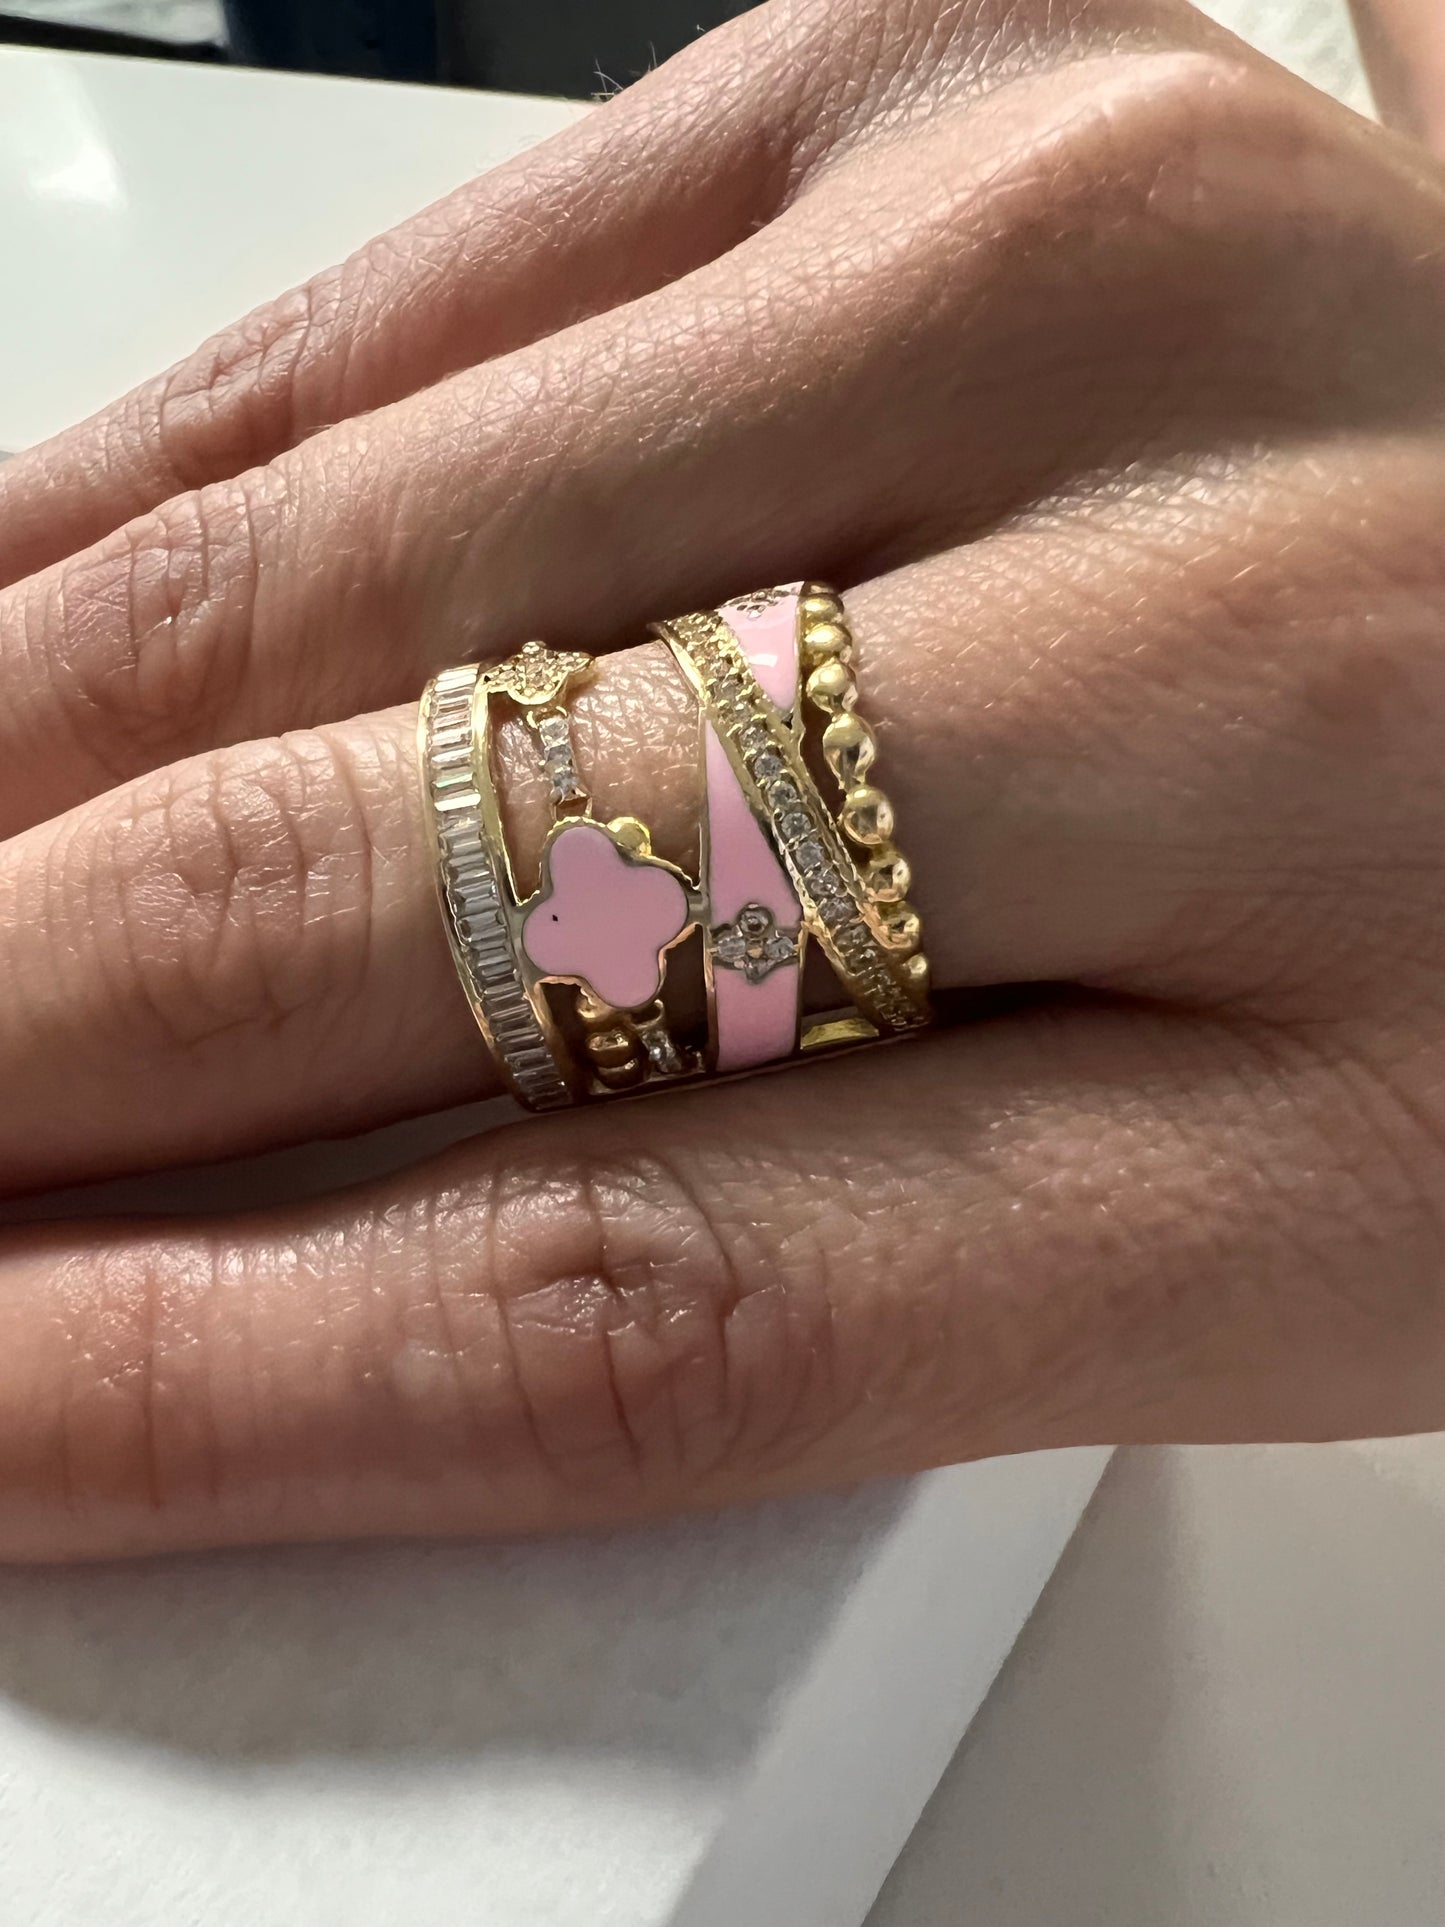 14K Yellow gold pink clover ring-227077